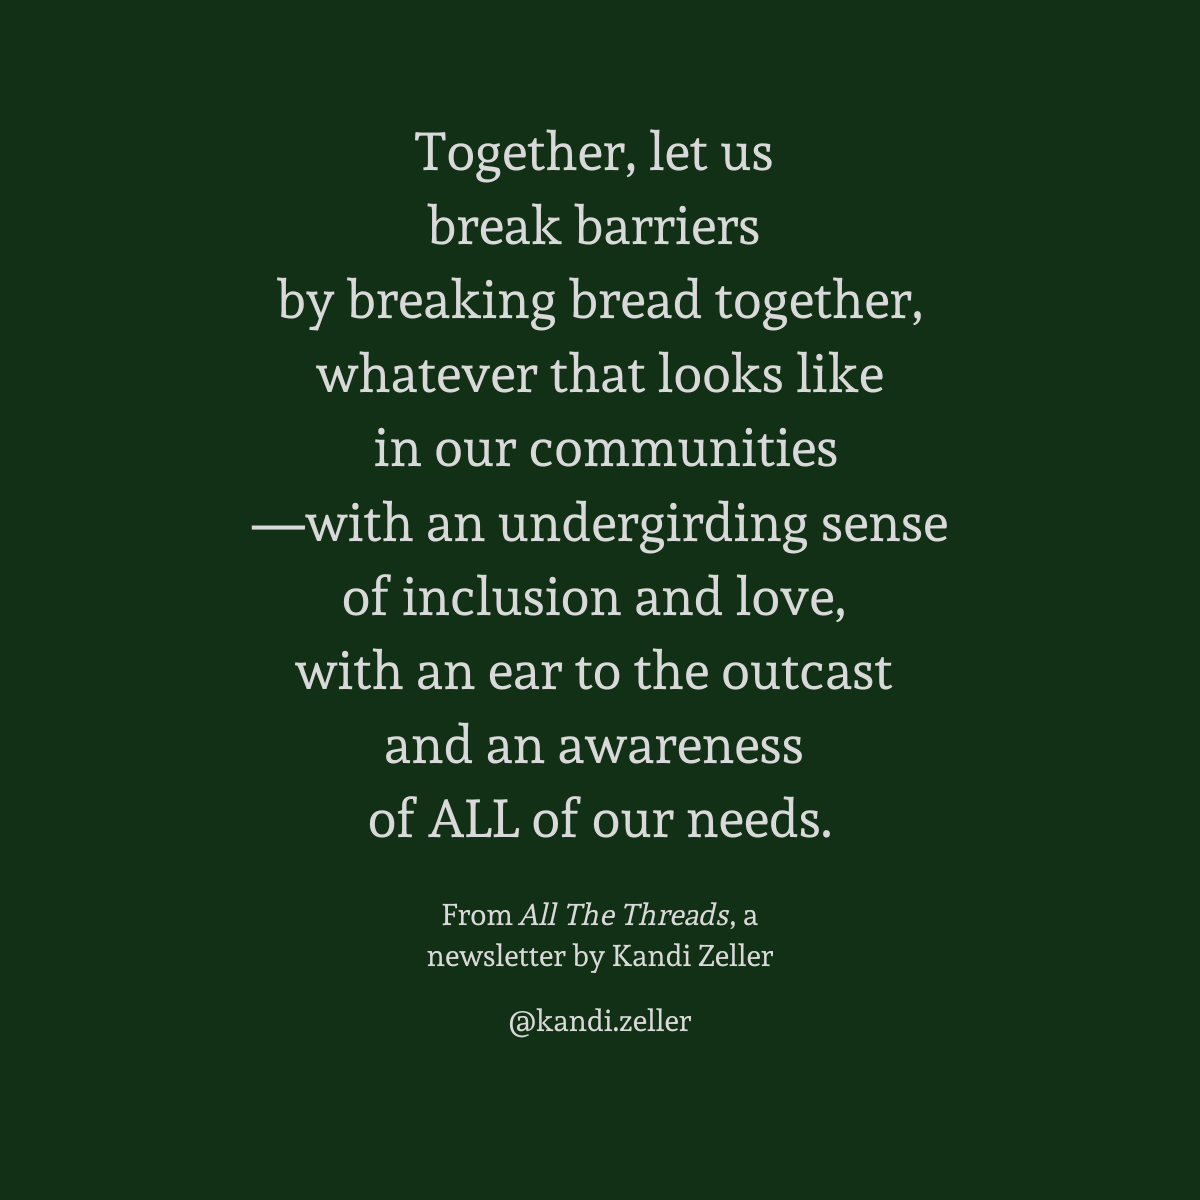 A dark green background with white lettering that reads, “Together, let us break barriers by breaking bread together, whatever that looks like in our communities—with an undergirding sense of inclusion and love, with an ear to the outcast and an awareness of ALL of our needs.” This is followed by the words, “From All The Threads, a newsletter by Kandi Zeller, @Kandi.Zeller”